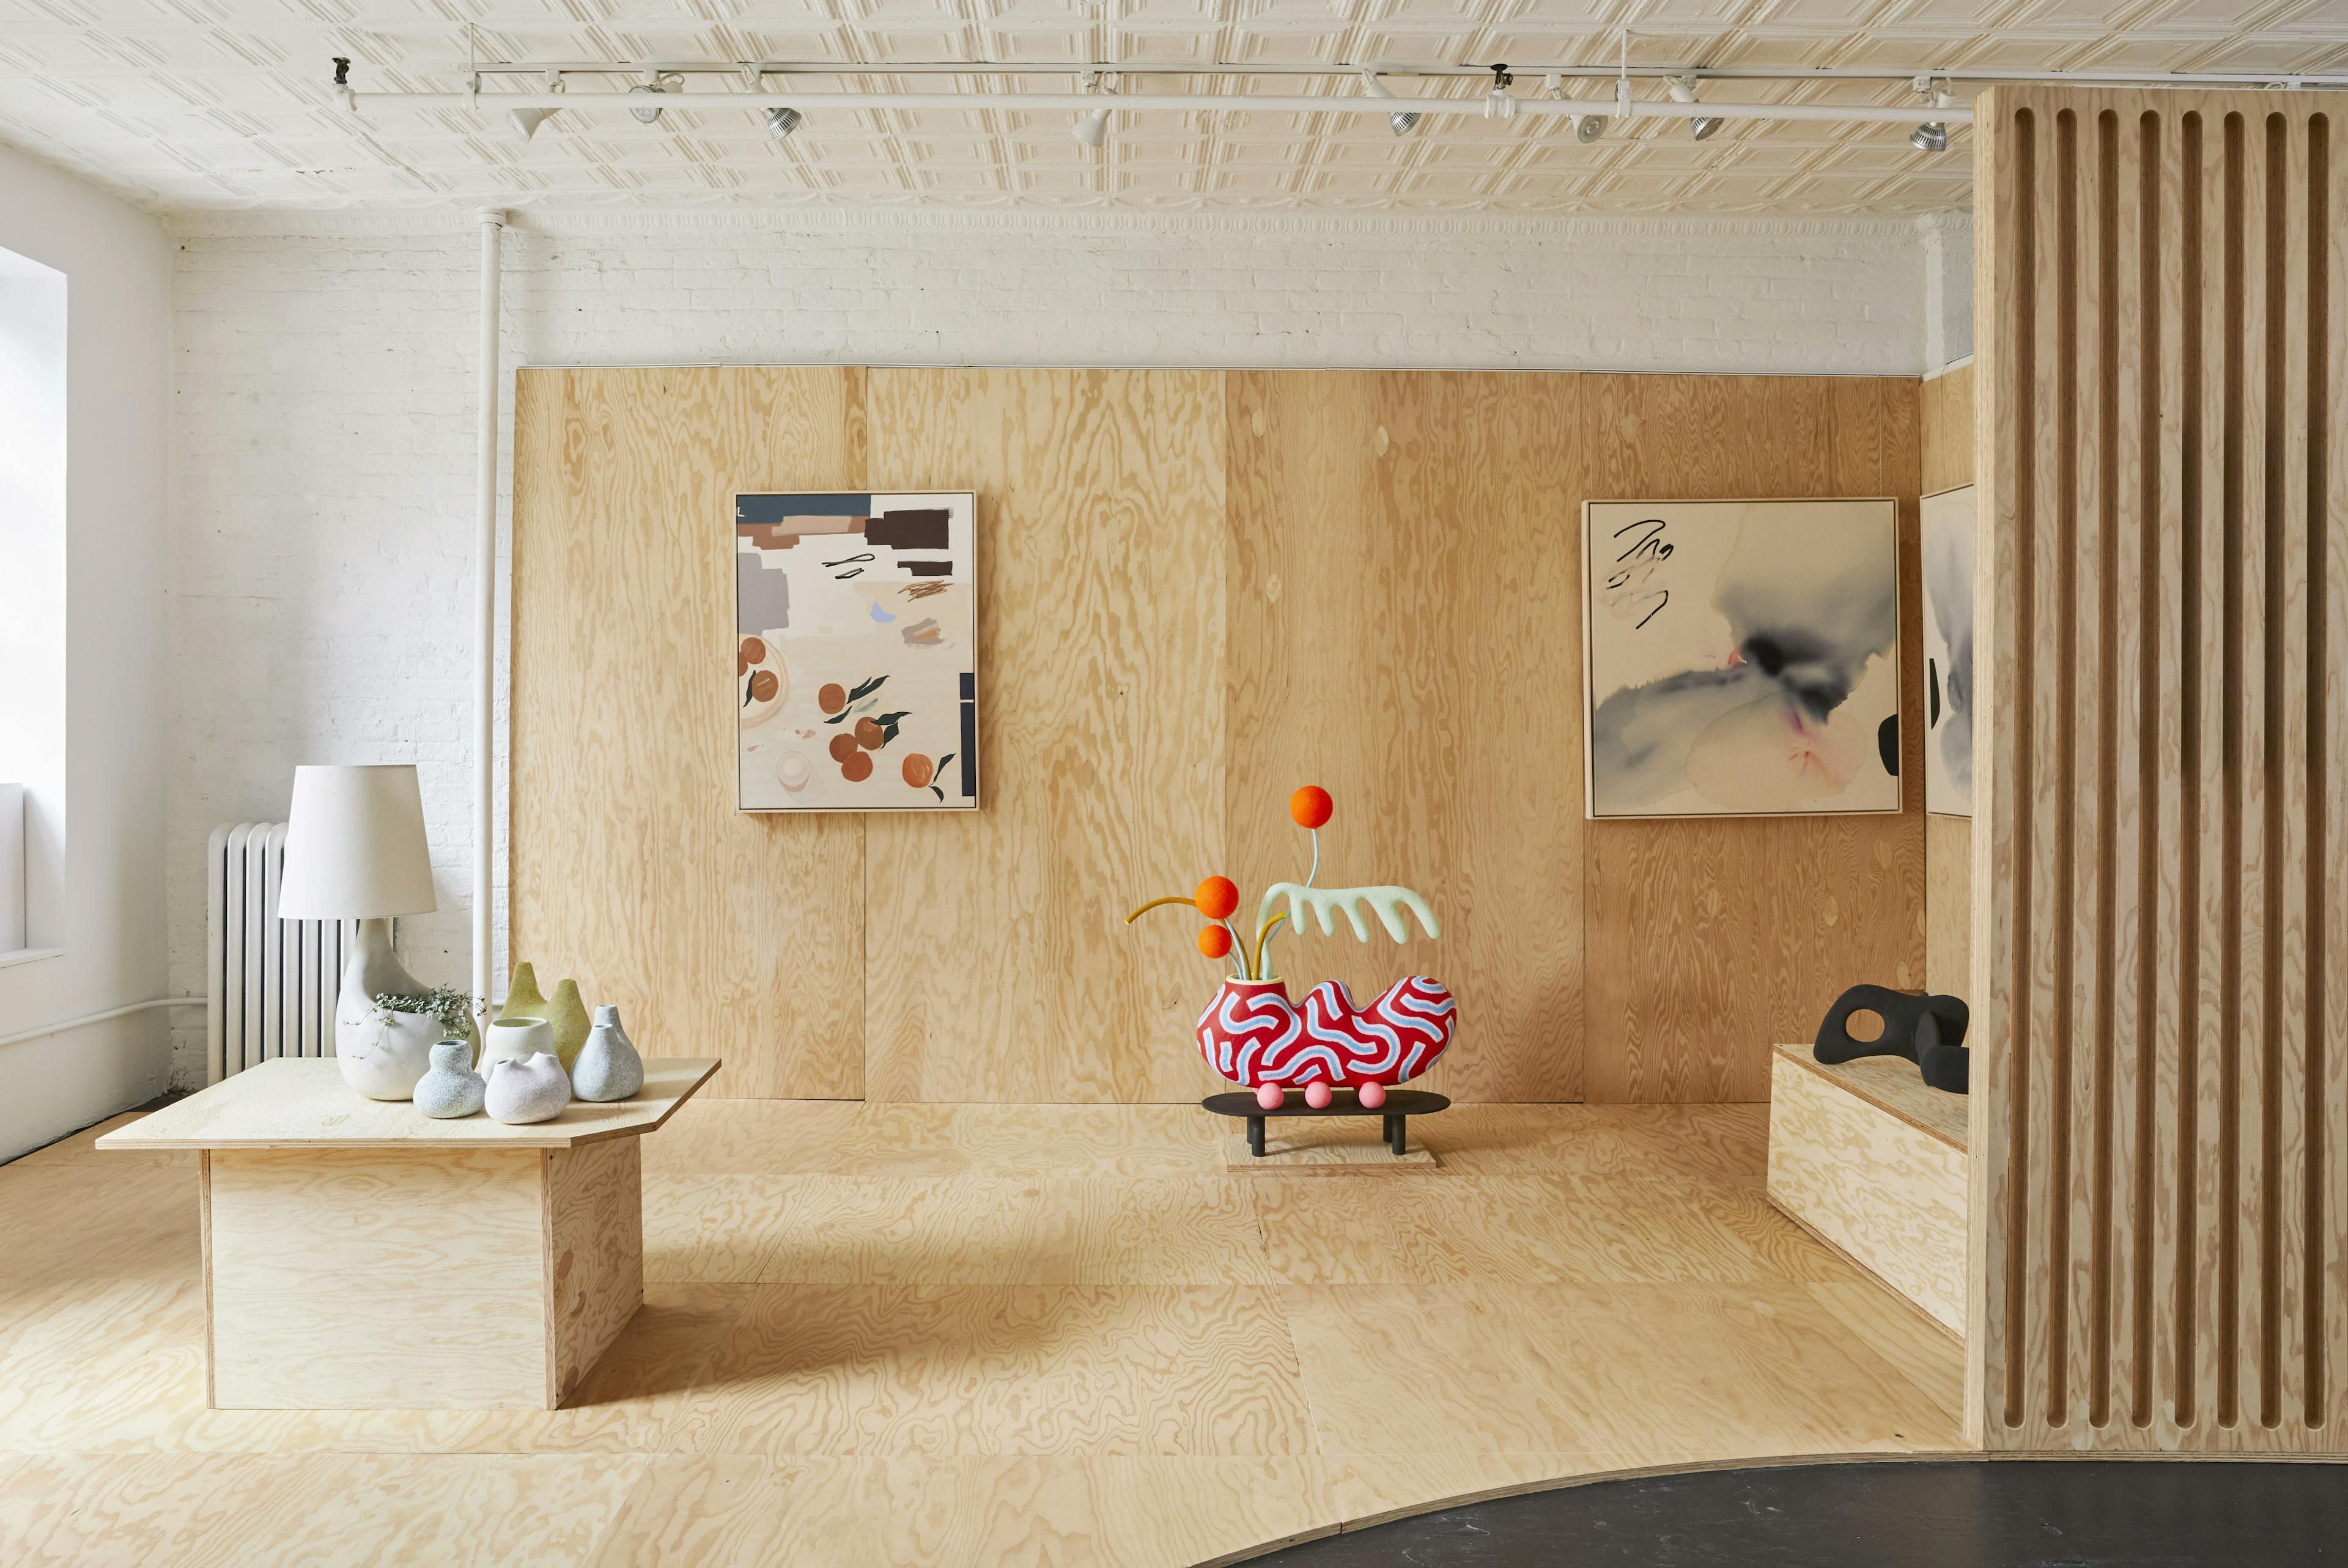 Raw plywood covers the walls and floors to create an exhibition space at Uprise Art, filled with abstract paintings and sculptures.